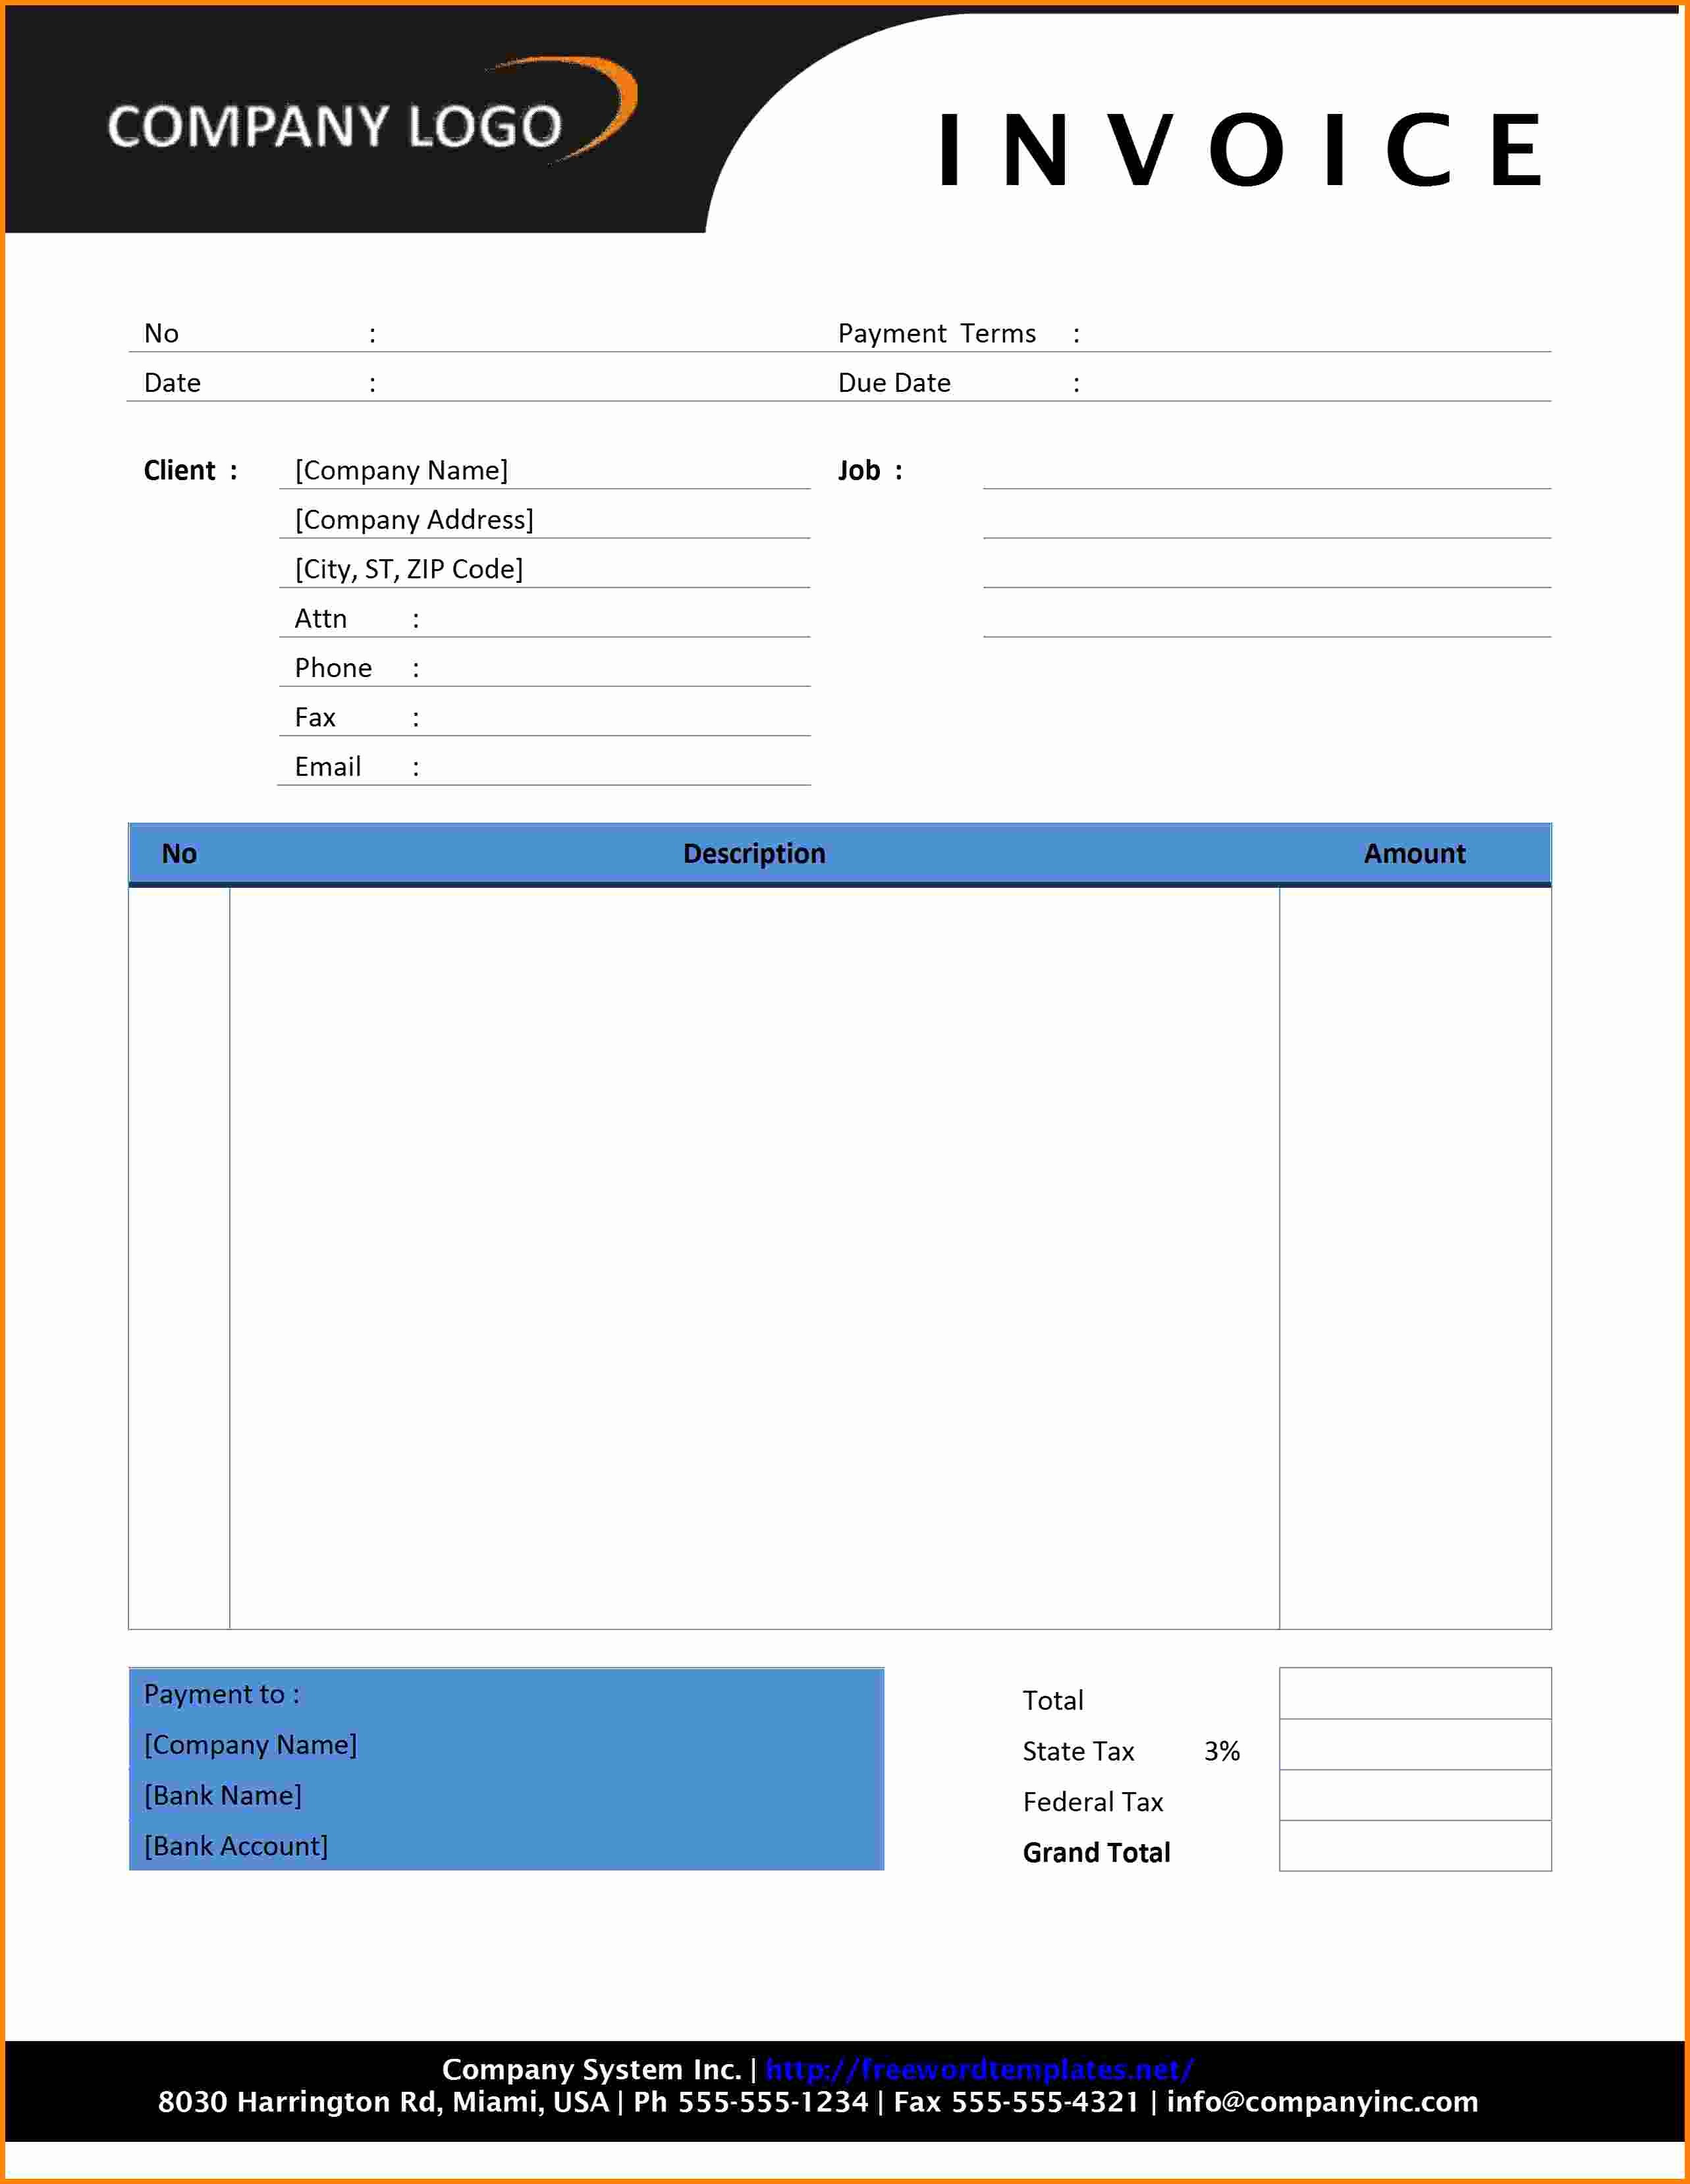 Microsoft Word Invoice Templates Free Inspirational 8 Invoice Template Word 2003